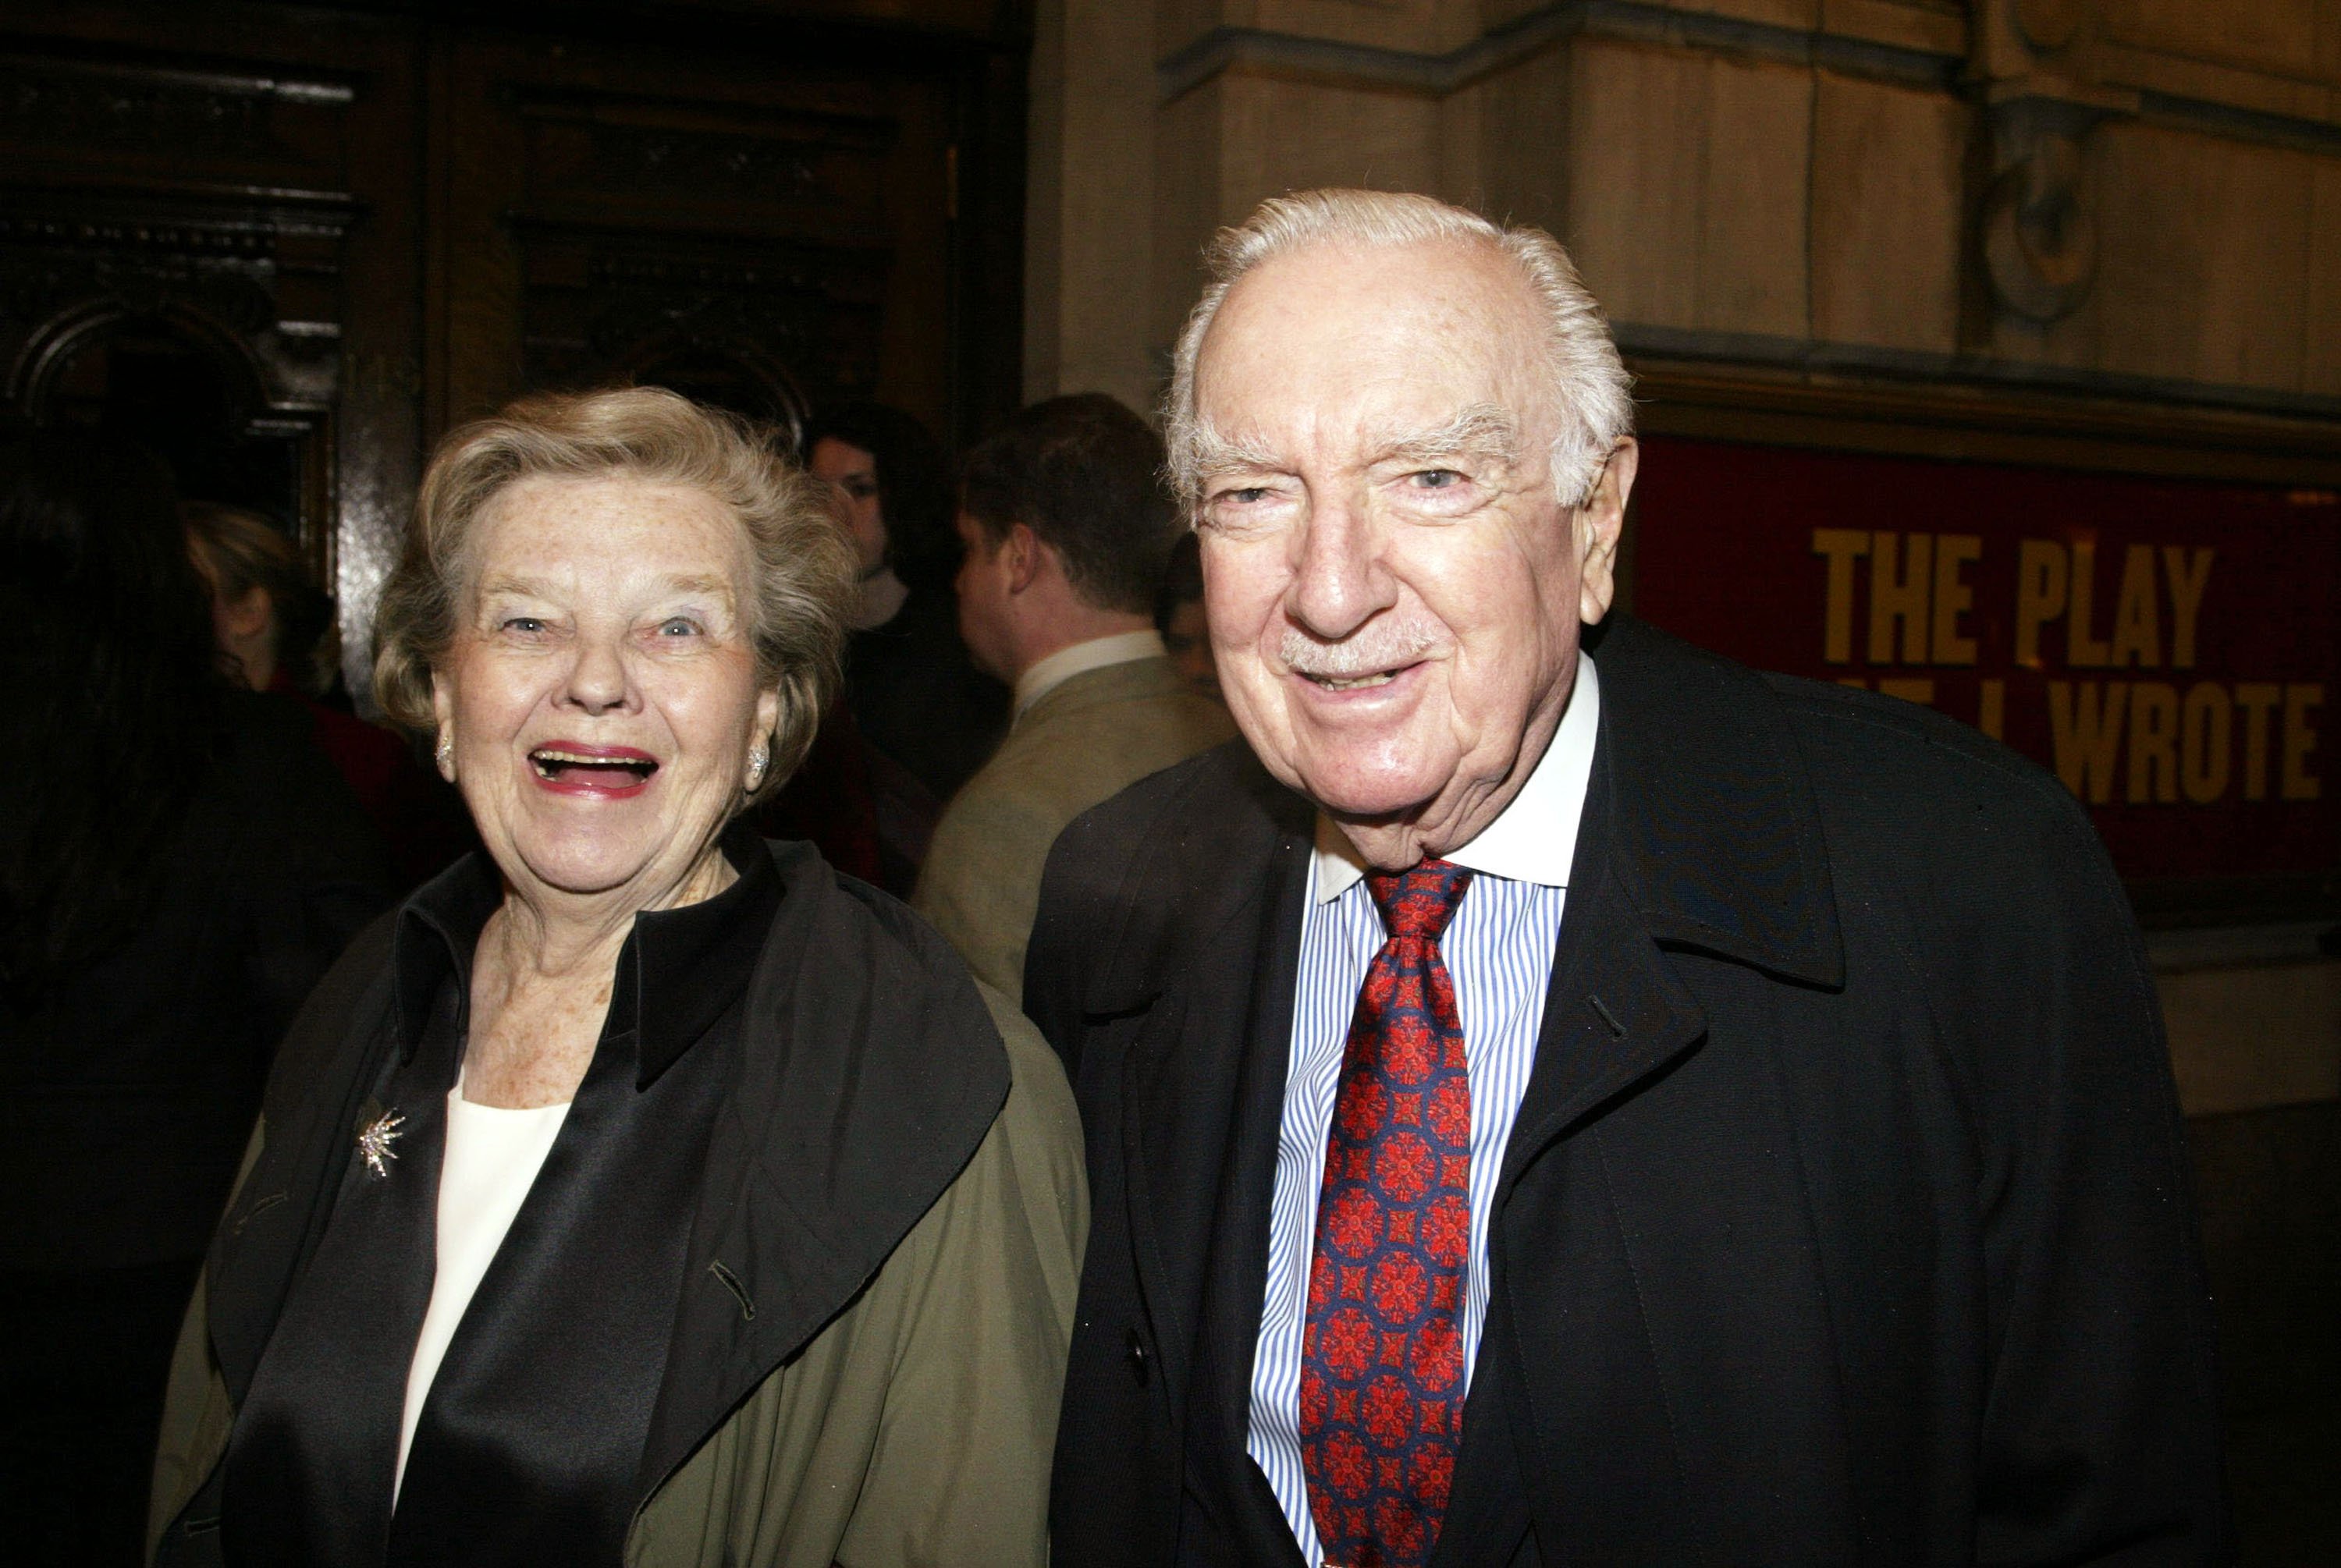 Walter Cronkite and his wife, Betsy Maxwell Cronkite, arrive at the opening night of "The Play What I Wrote" at The Lyceum Theatre on March 30, 2003 in New York City. | Source: Getty Images